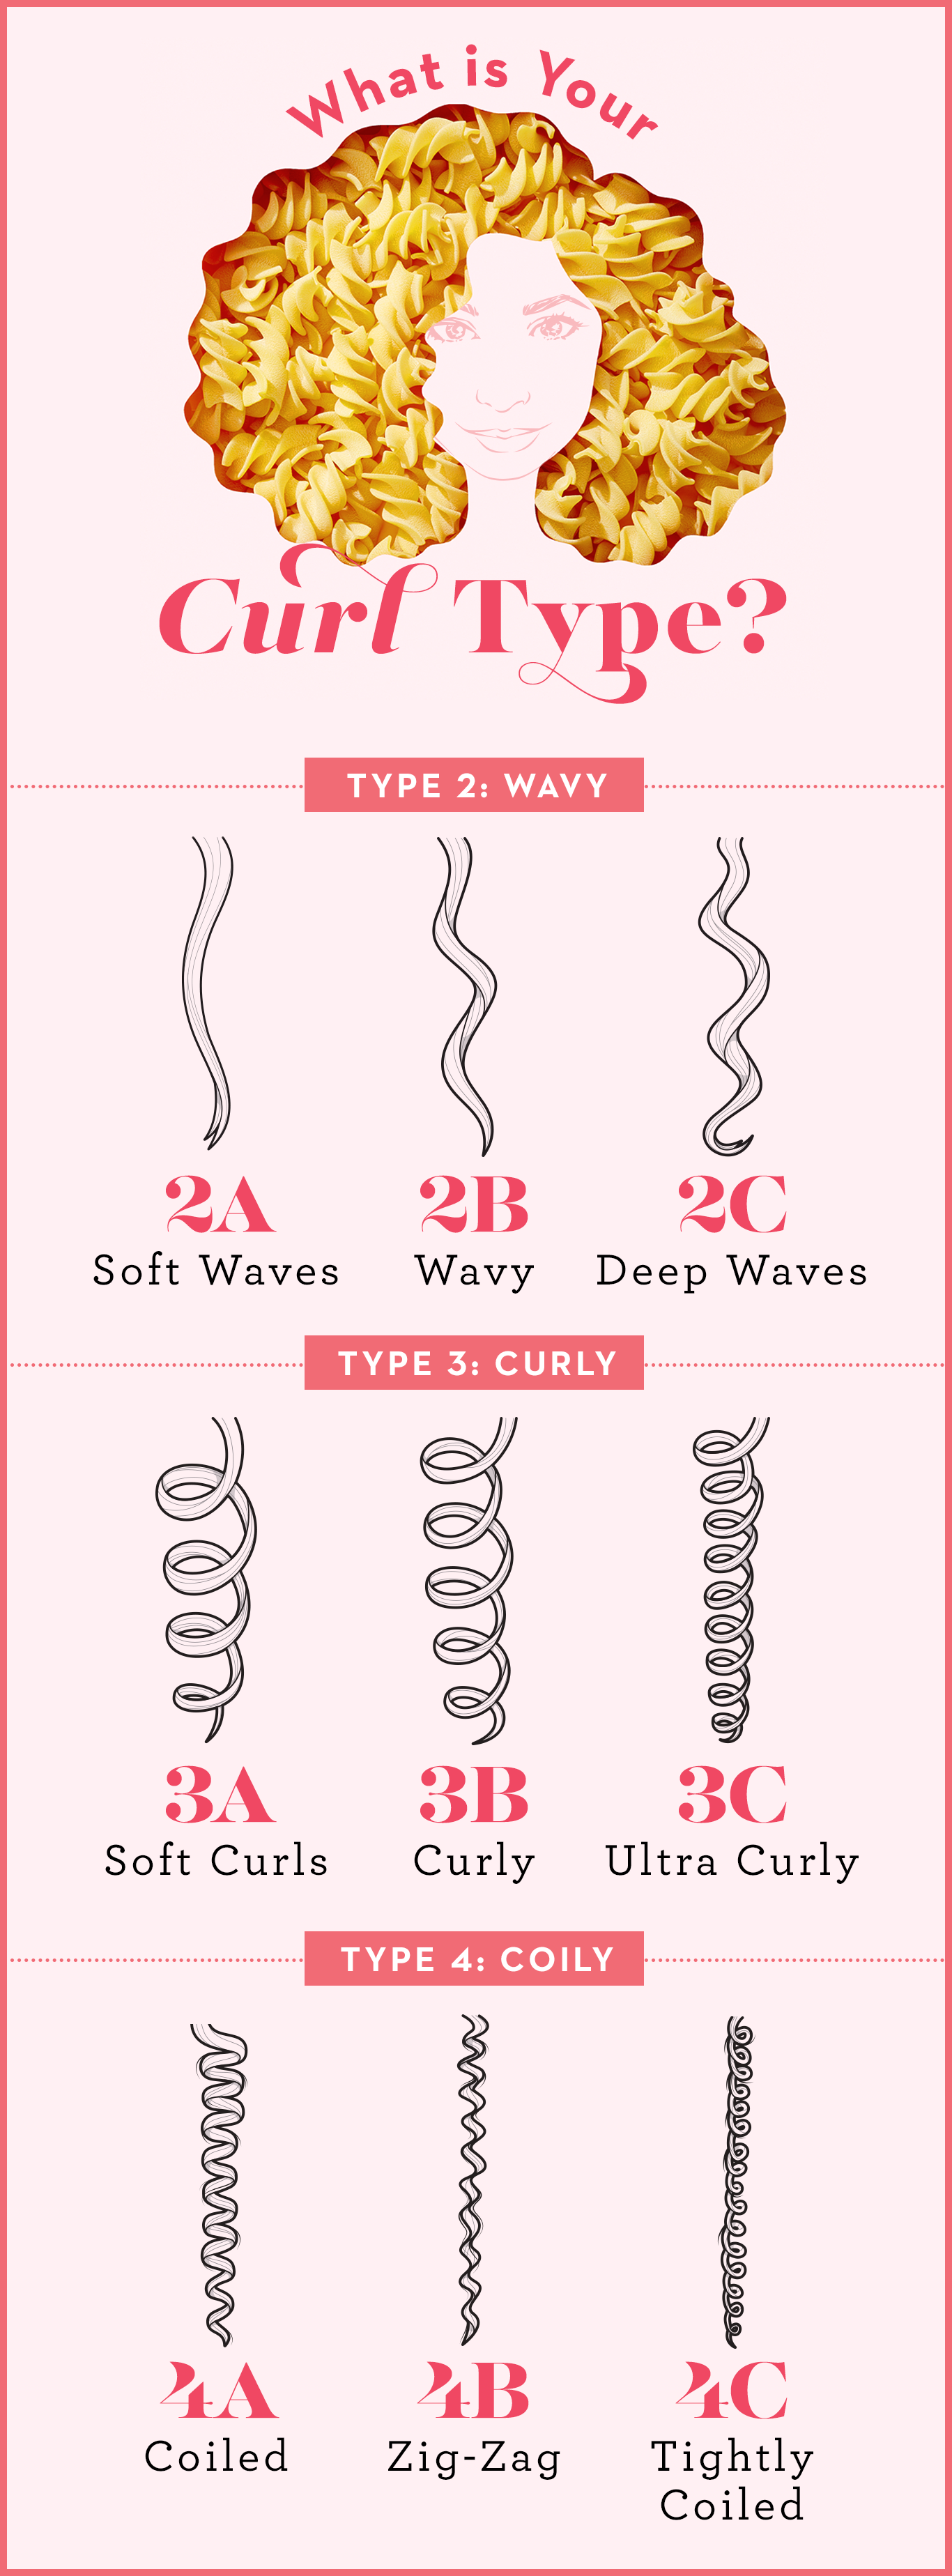 Type 2B Hair What It Is and How to Care for It